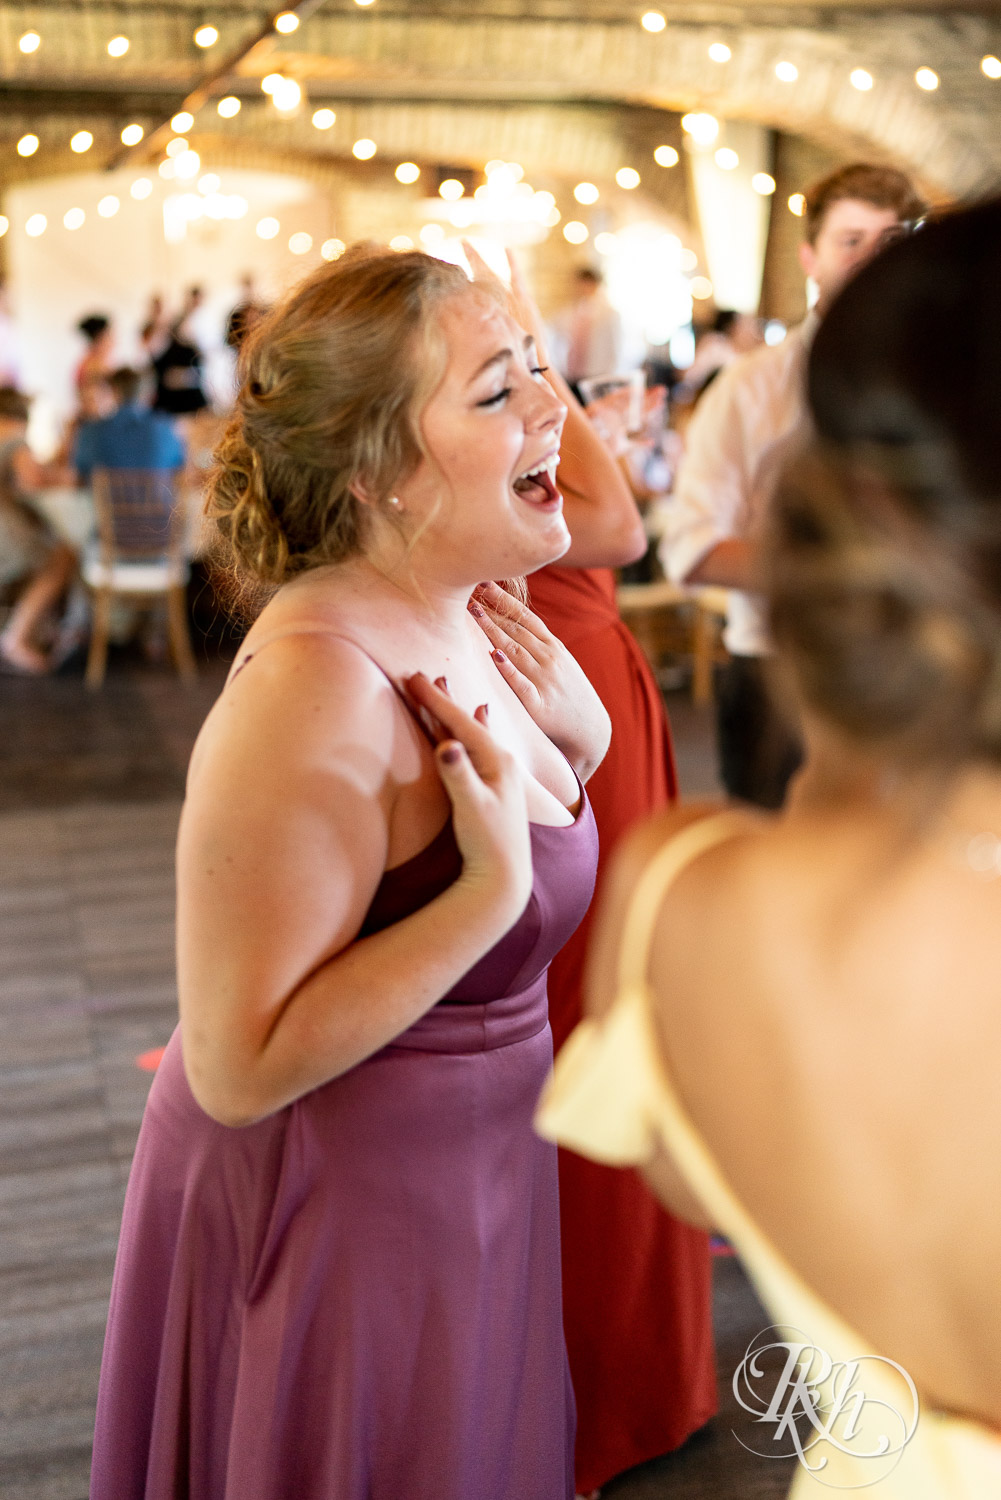 Guests dance with bride and groom at wedding reception at Mayowood Stone Barn in Rochester, Minnesota.